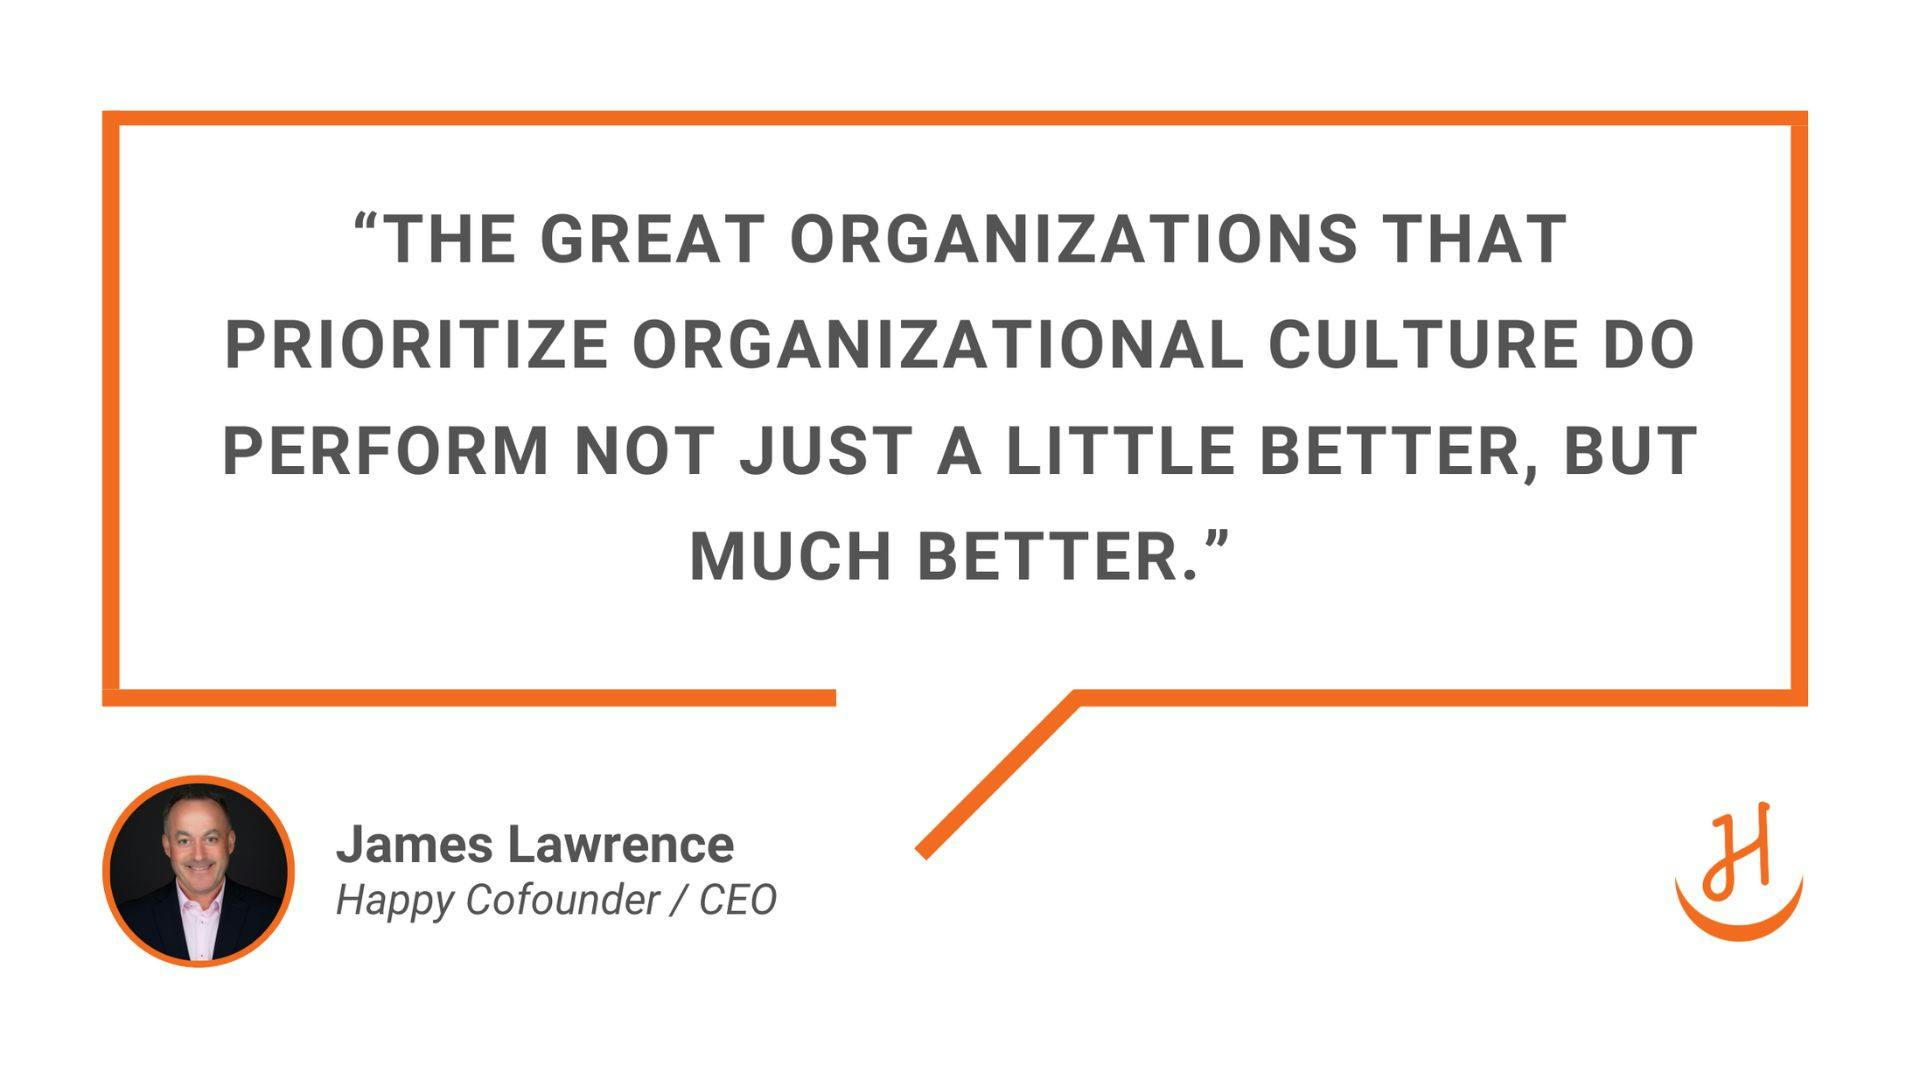 "The great organizations that prioritize organizational culture do perform not just a little better, but much better." Quote by James Lawrence, Happy Cofounder and CEO.